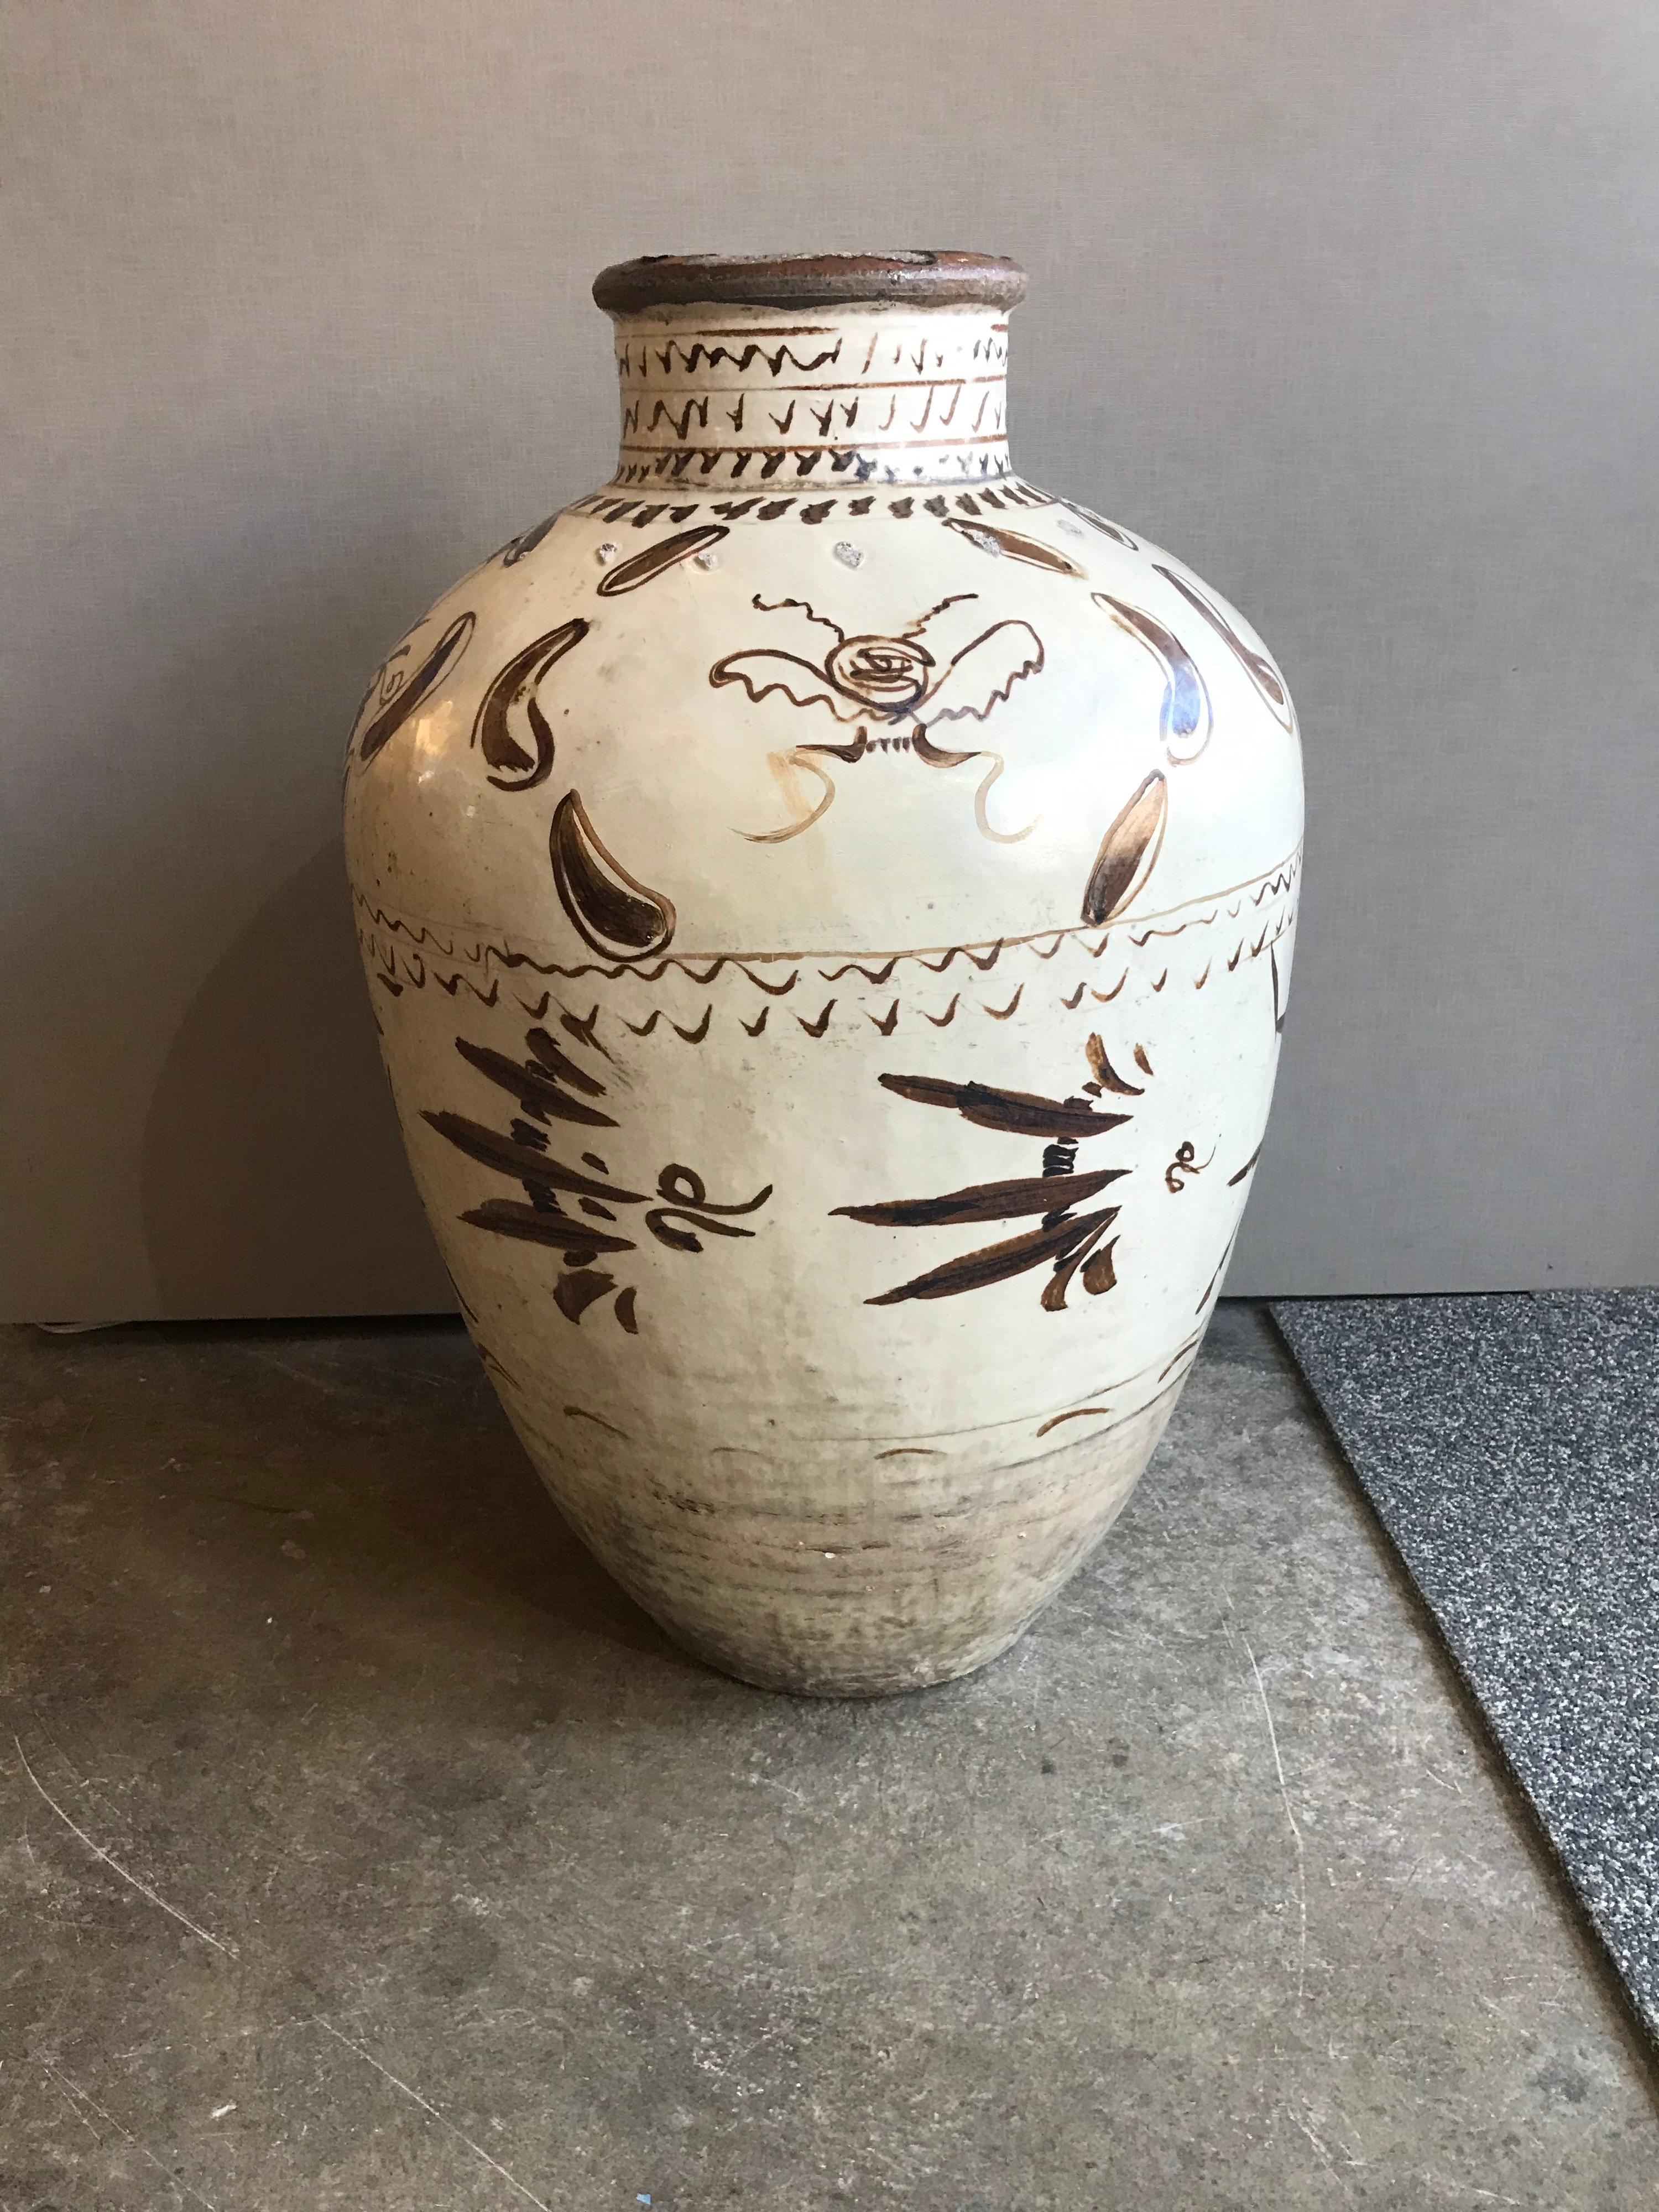 This is a lovely old Asian pot from the Ming dynasty late 16th-17th century from what i was told they were used as wine jars.